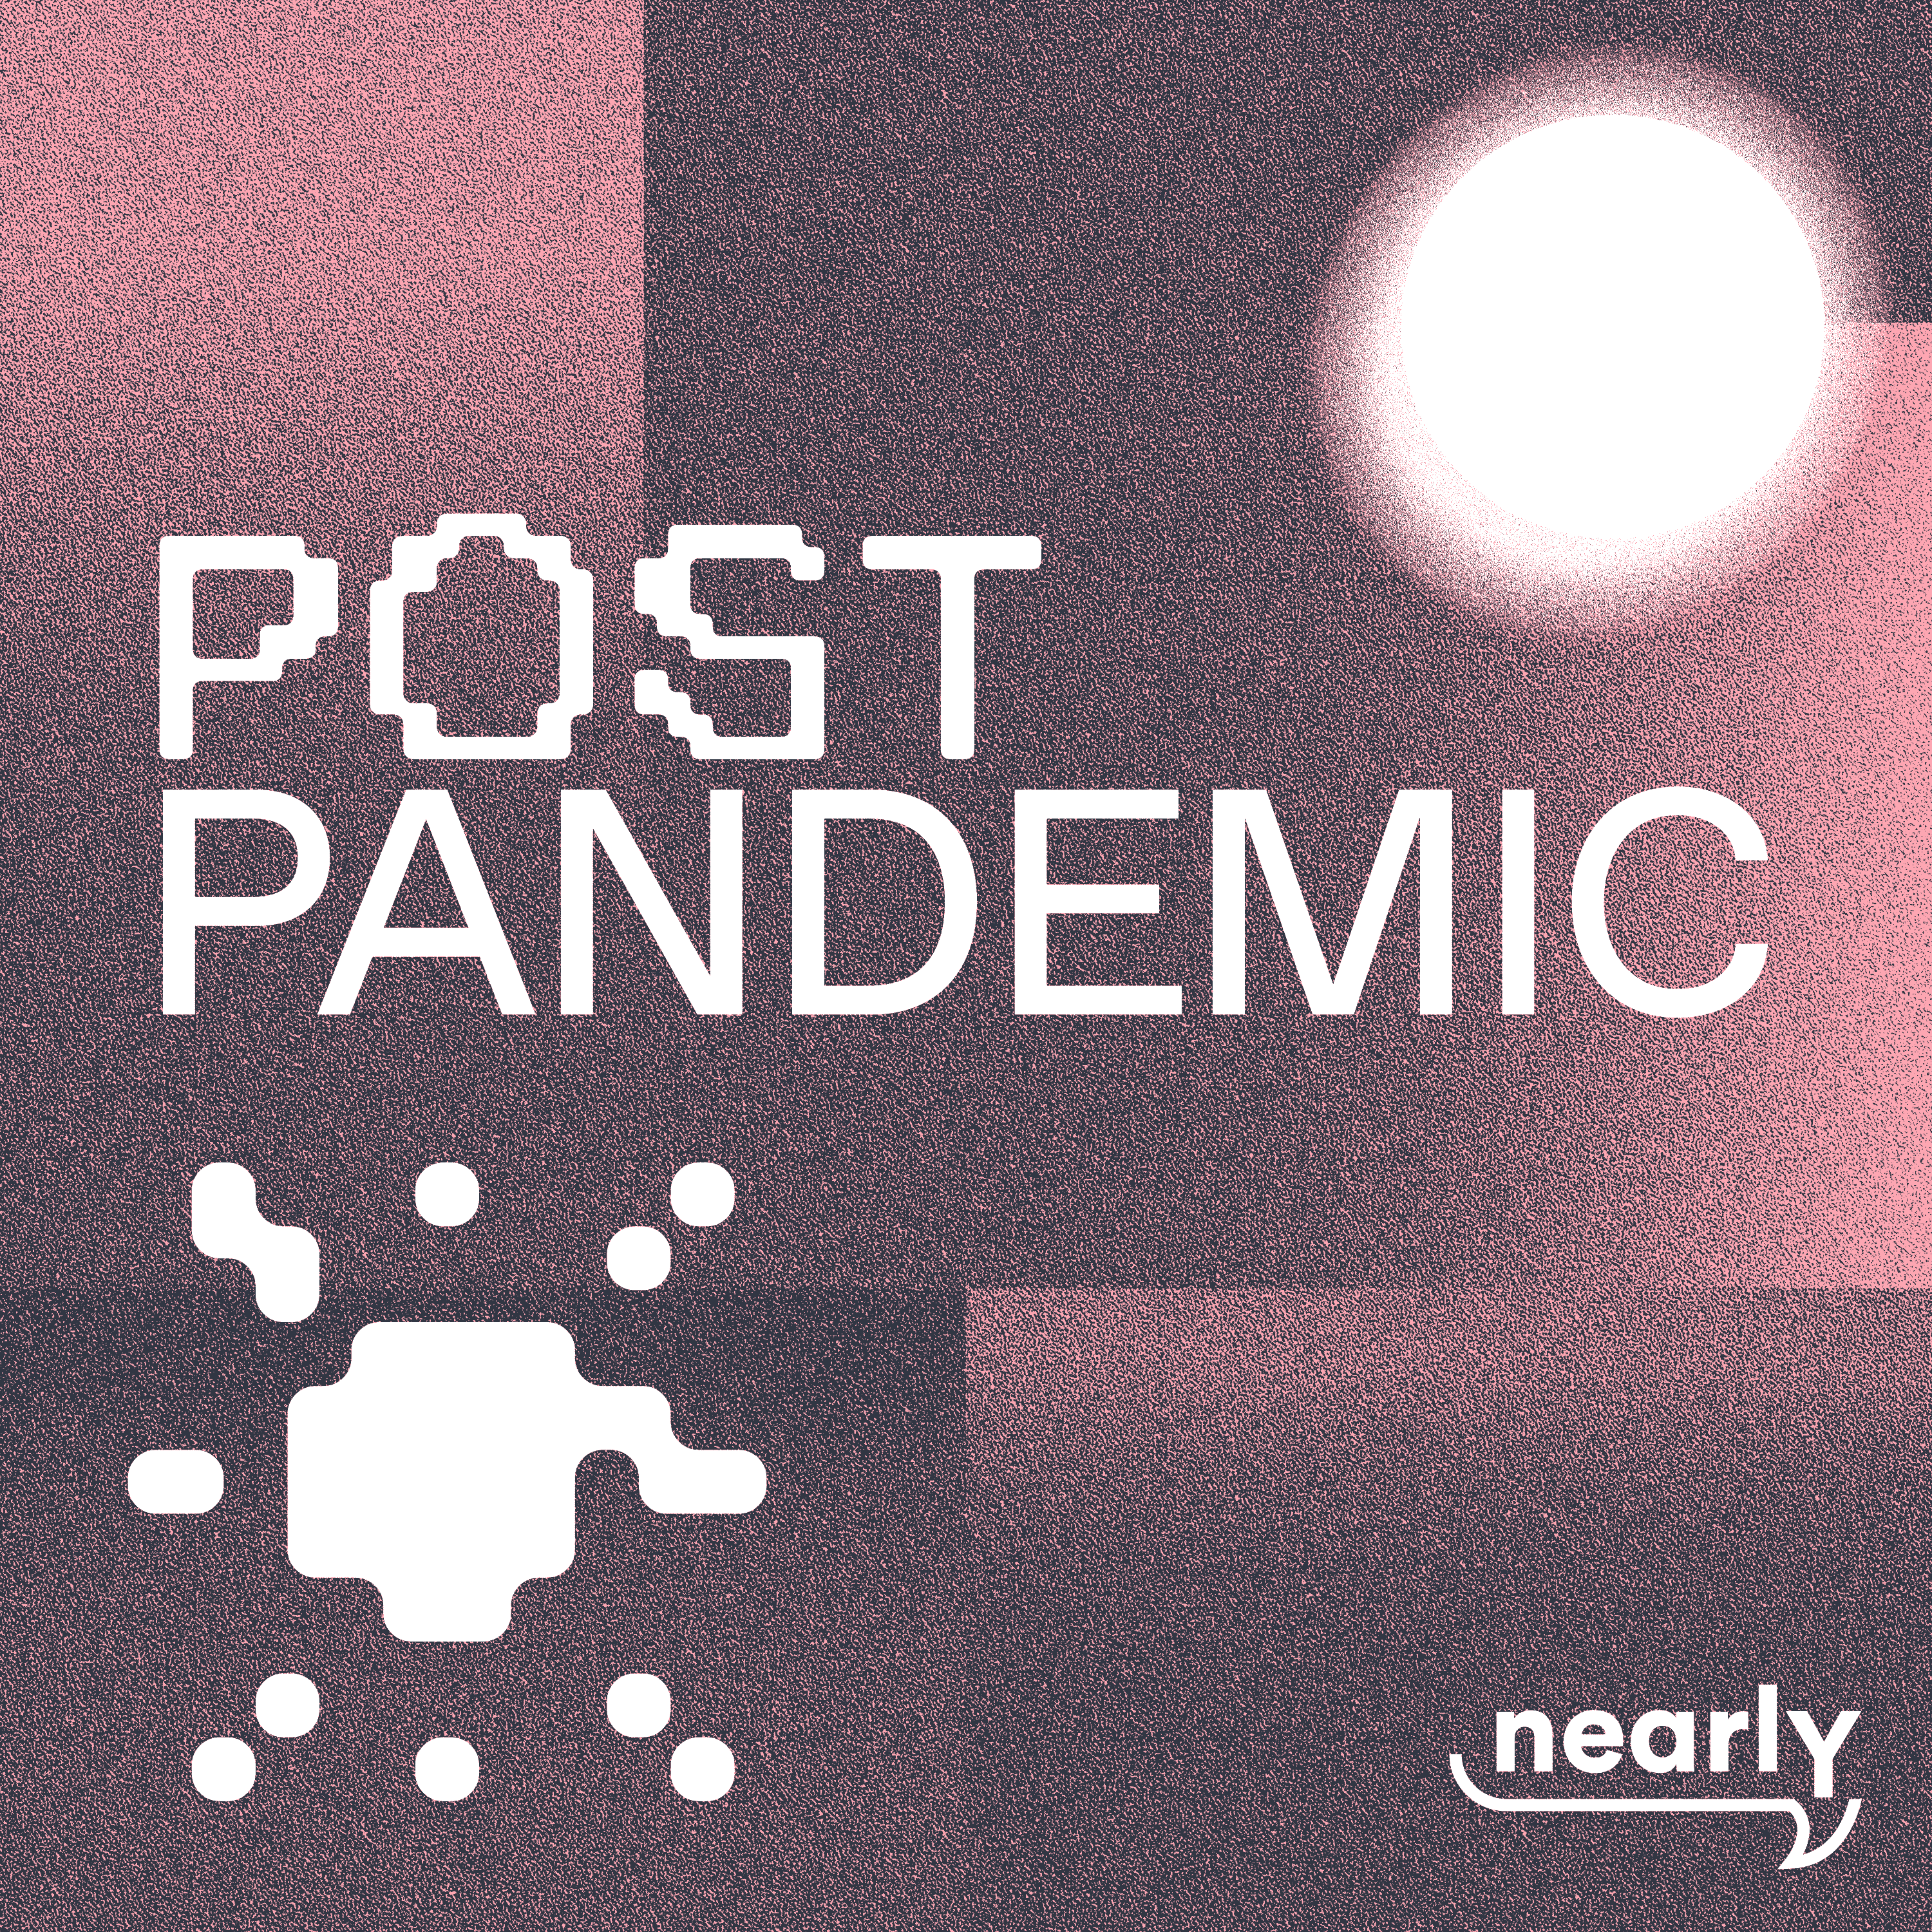 What's Post Pandemic?